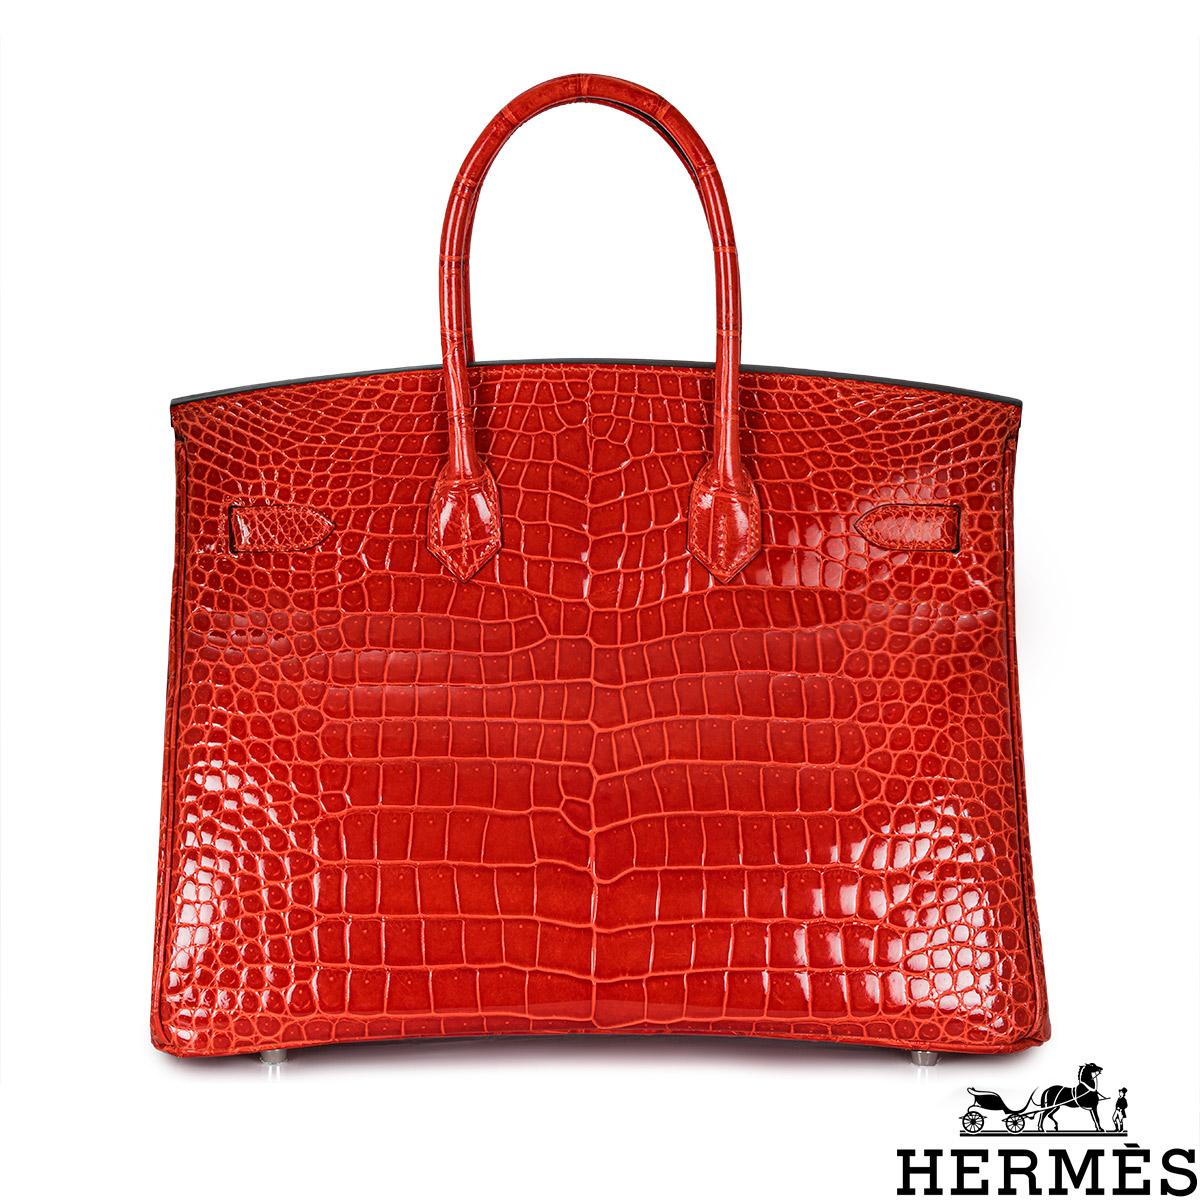 A statement Hermès 35cm Birkin bag. The exterior of this exotic Birkin is in a shiny Geranium Porosus Crocodile with tonal stitching. It adorns palladium hardware, two top handles and front toggle closure. The interior features a zipper pocket with